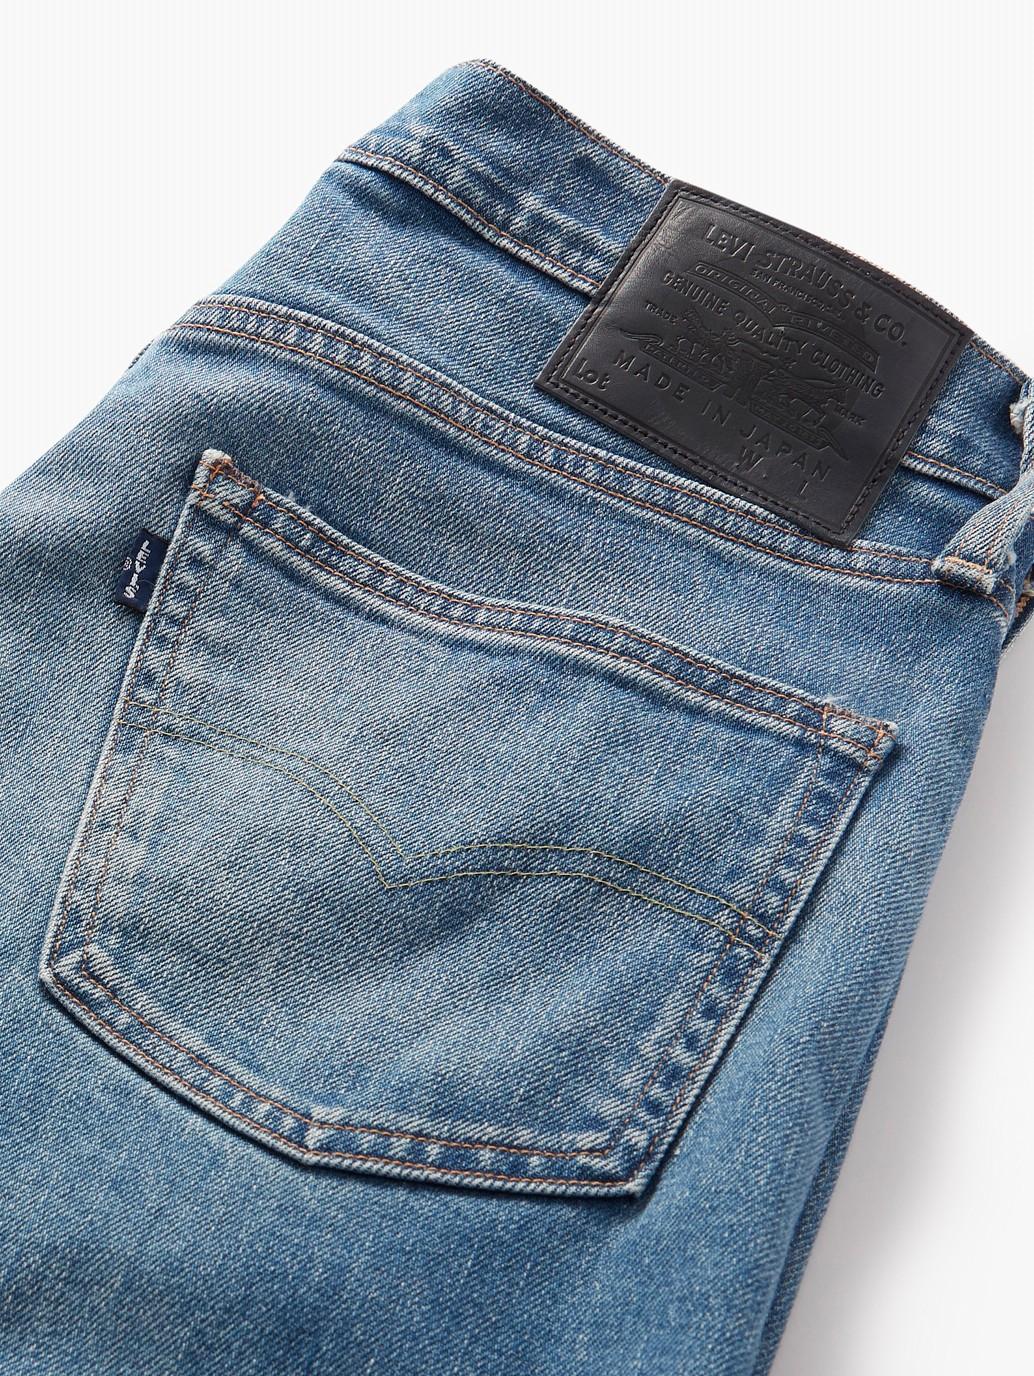 Buy Levi's® Men's Made in Japan 511™ Jeans | Levi's Official